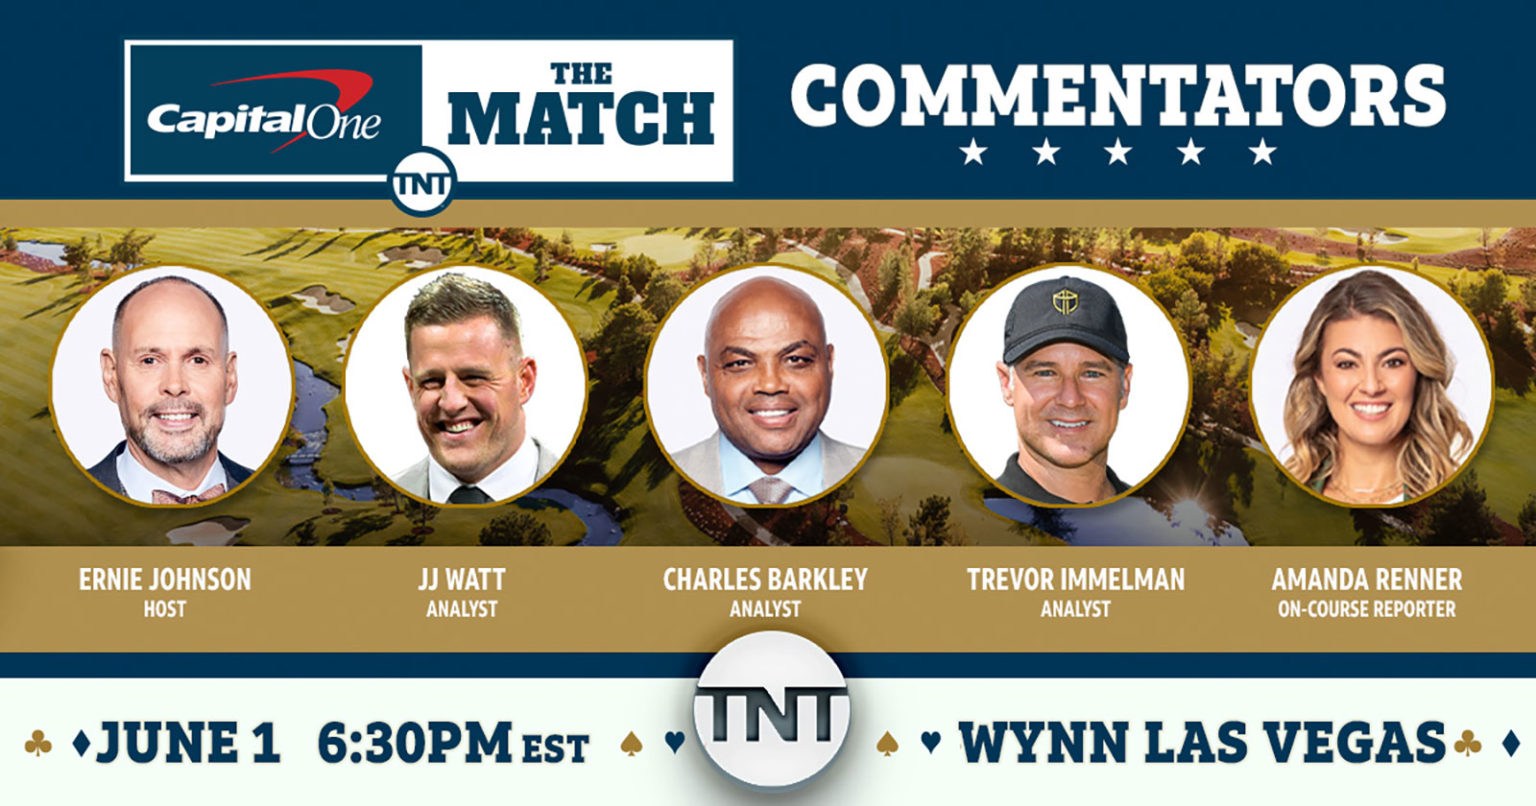 Turner Sports’ Presentation of Capital One’s The Match Wednesday